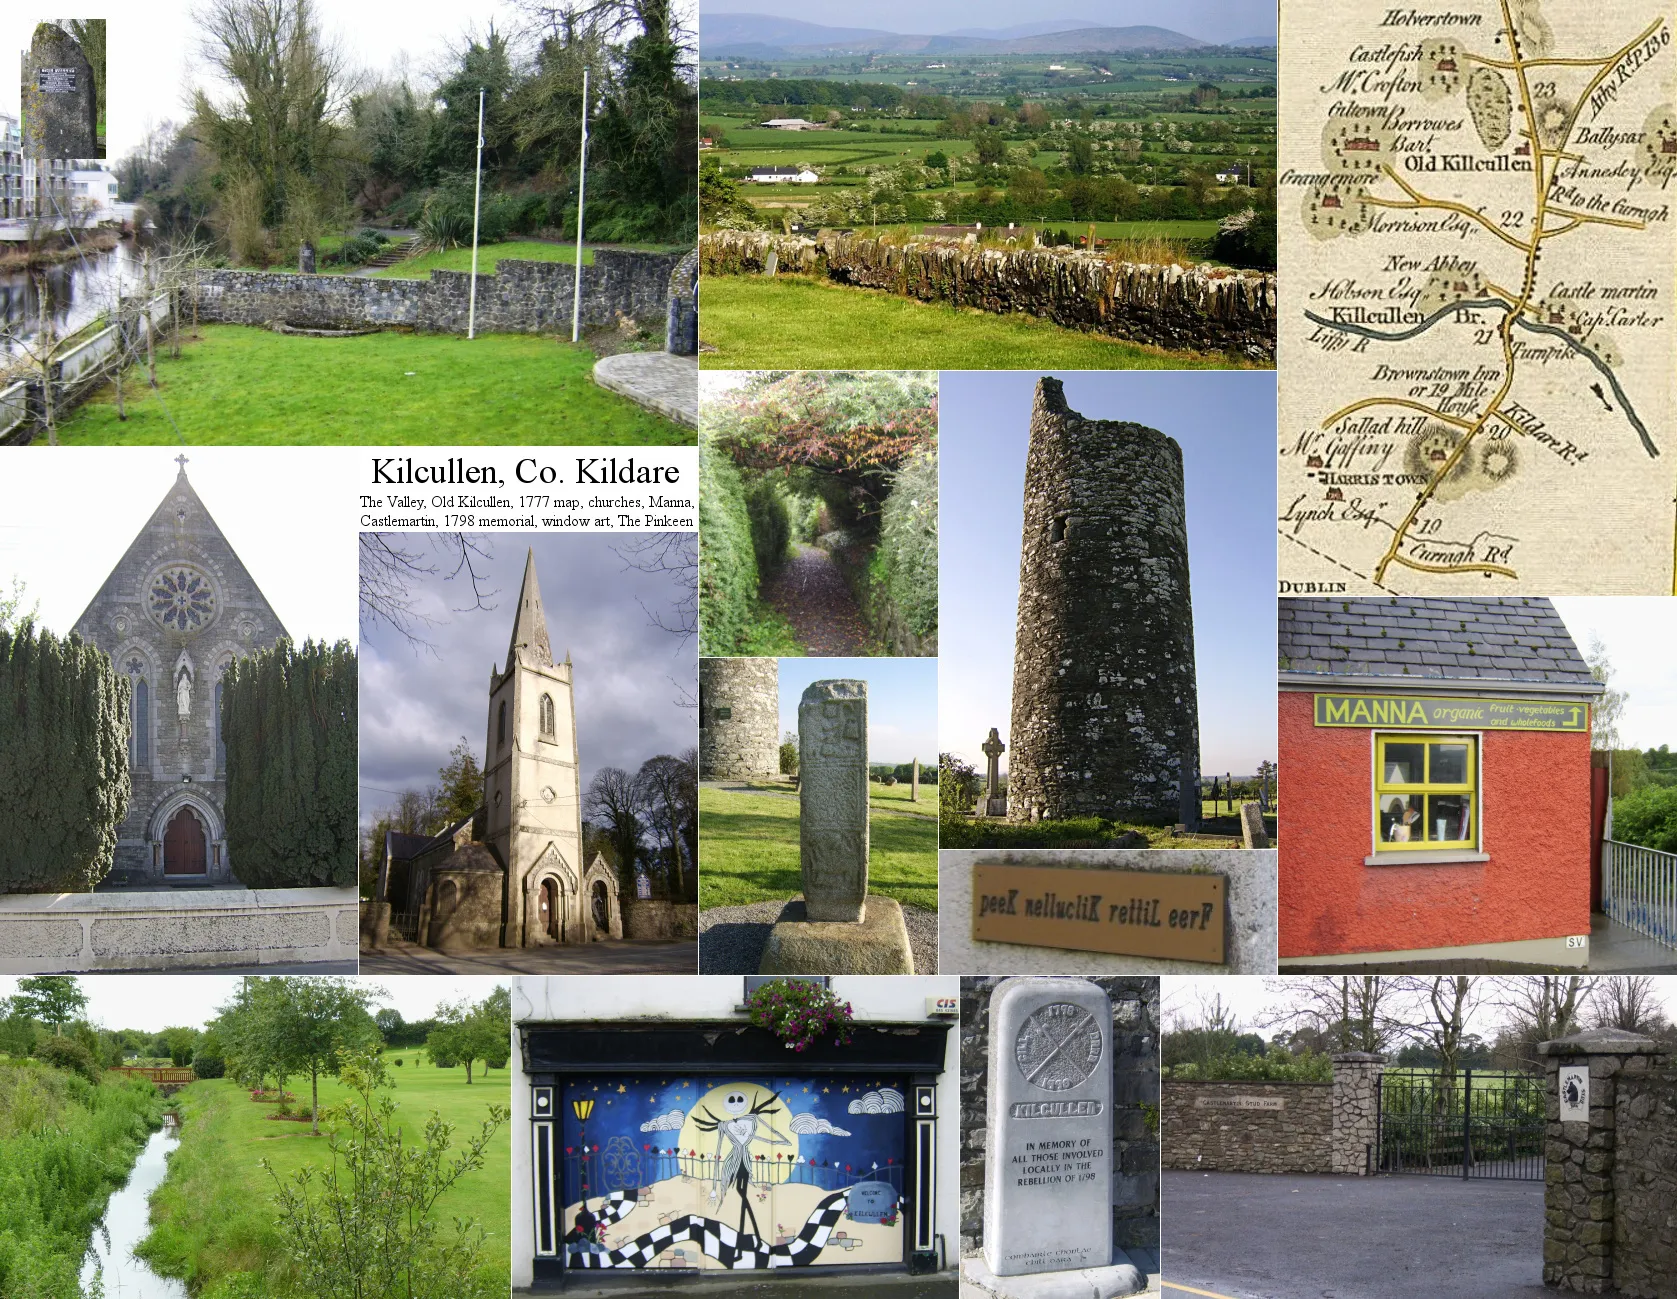 Photo showing: Postcard of Kilcullen (officially Kilcullen Bridge), Co. Kildare, Ireland, with images of The Valley Community Park and R. Liffey, a view from Old Kilcullen, the relevant part of Ireland's first set of road maps, one each of the local Roman Catholic and Church of Ireland churches, a remnant of a High Cross, and the ruins of the Round Tower at Old Kilcullen, the Pinkeen Stream, the 1798 memorial near the town bridge, the gates of Castlemartin Stud, and other local scenes.